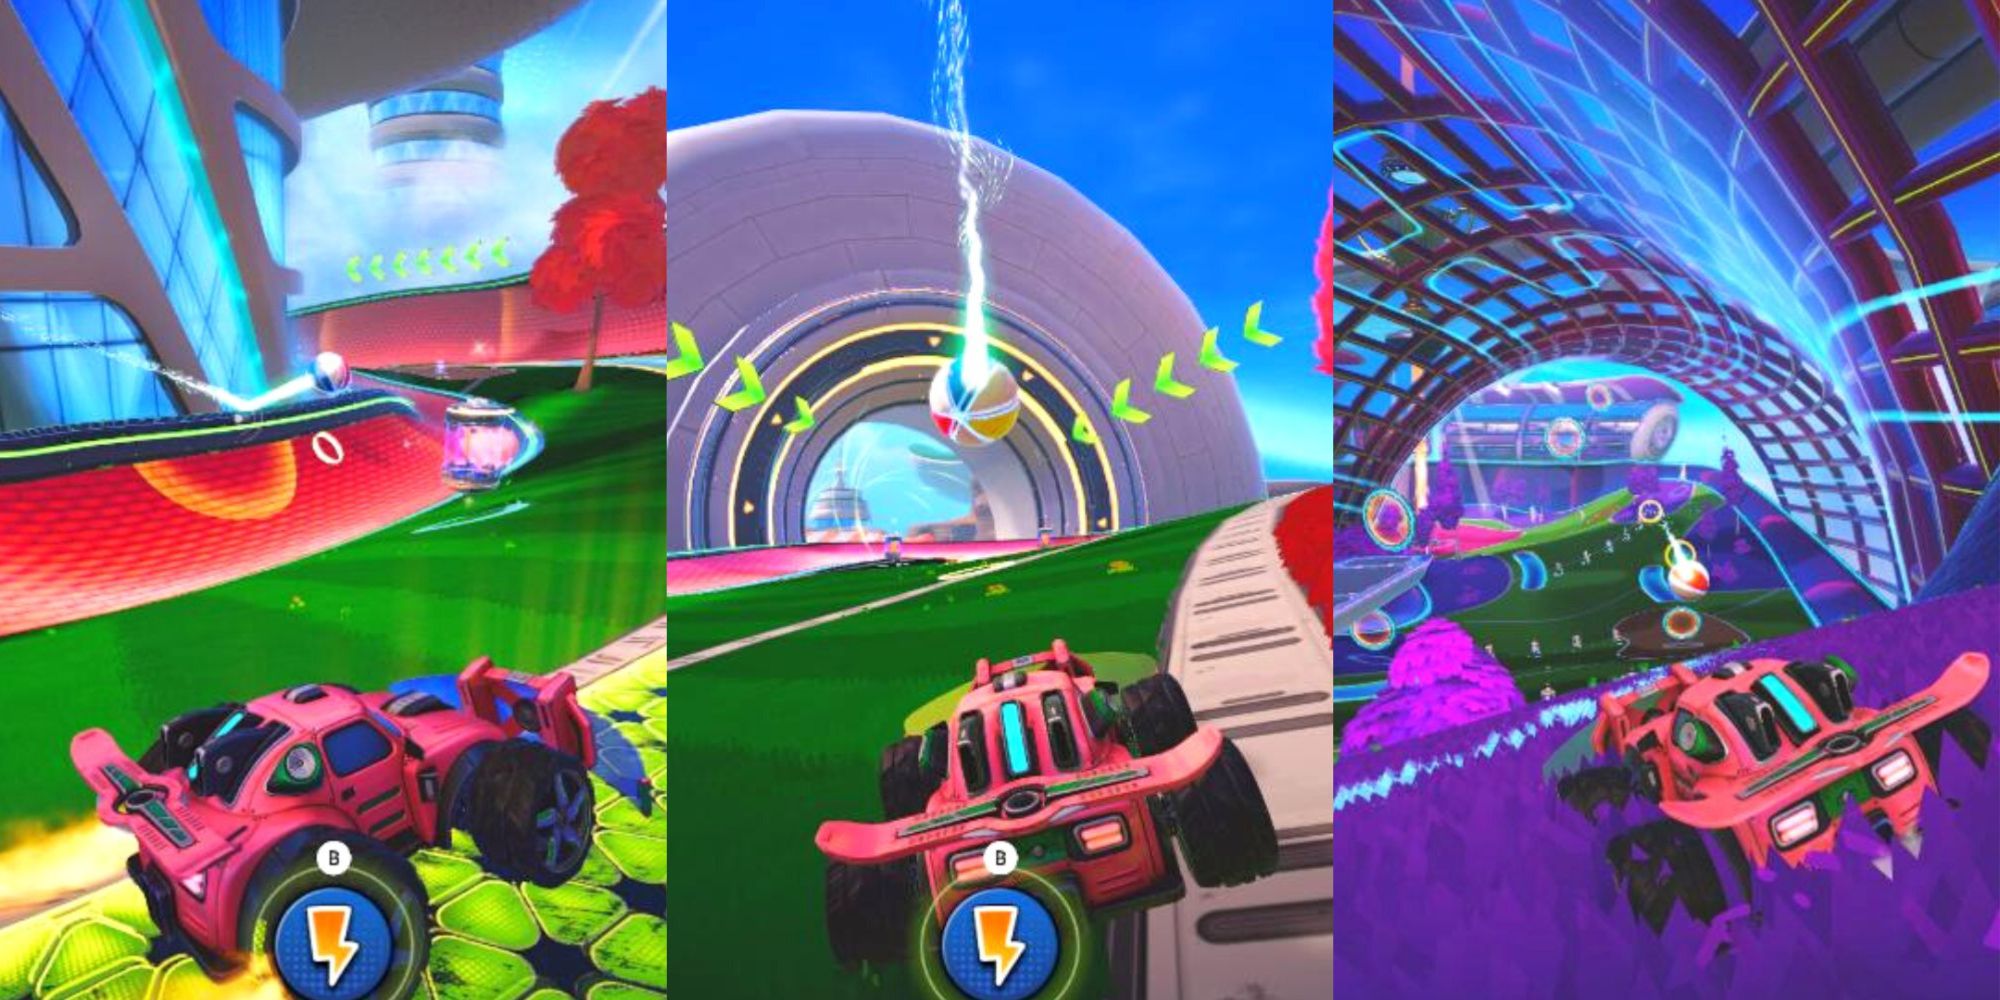 The Snake, Hyper Flight Path, And Terminal 19 In Turbo Golf Racing